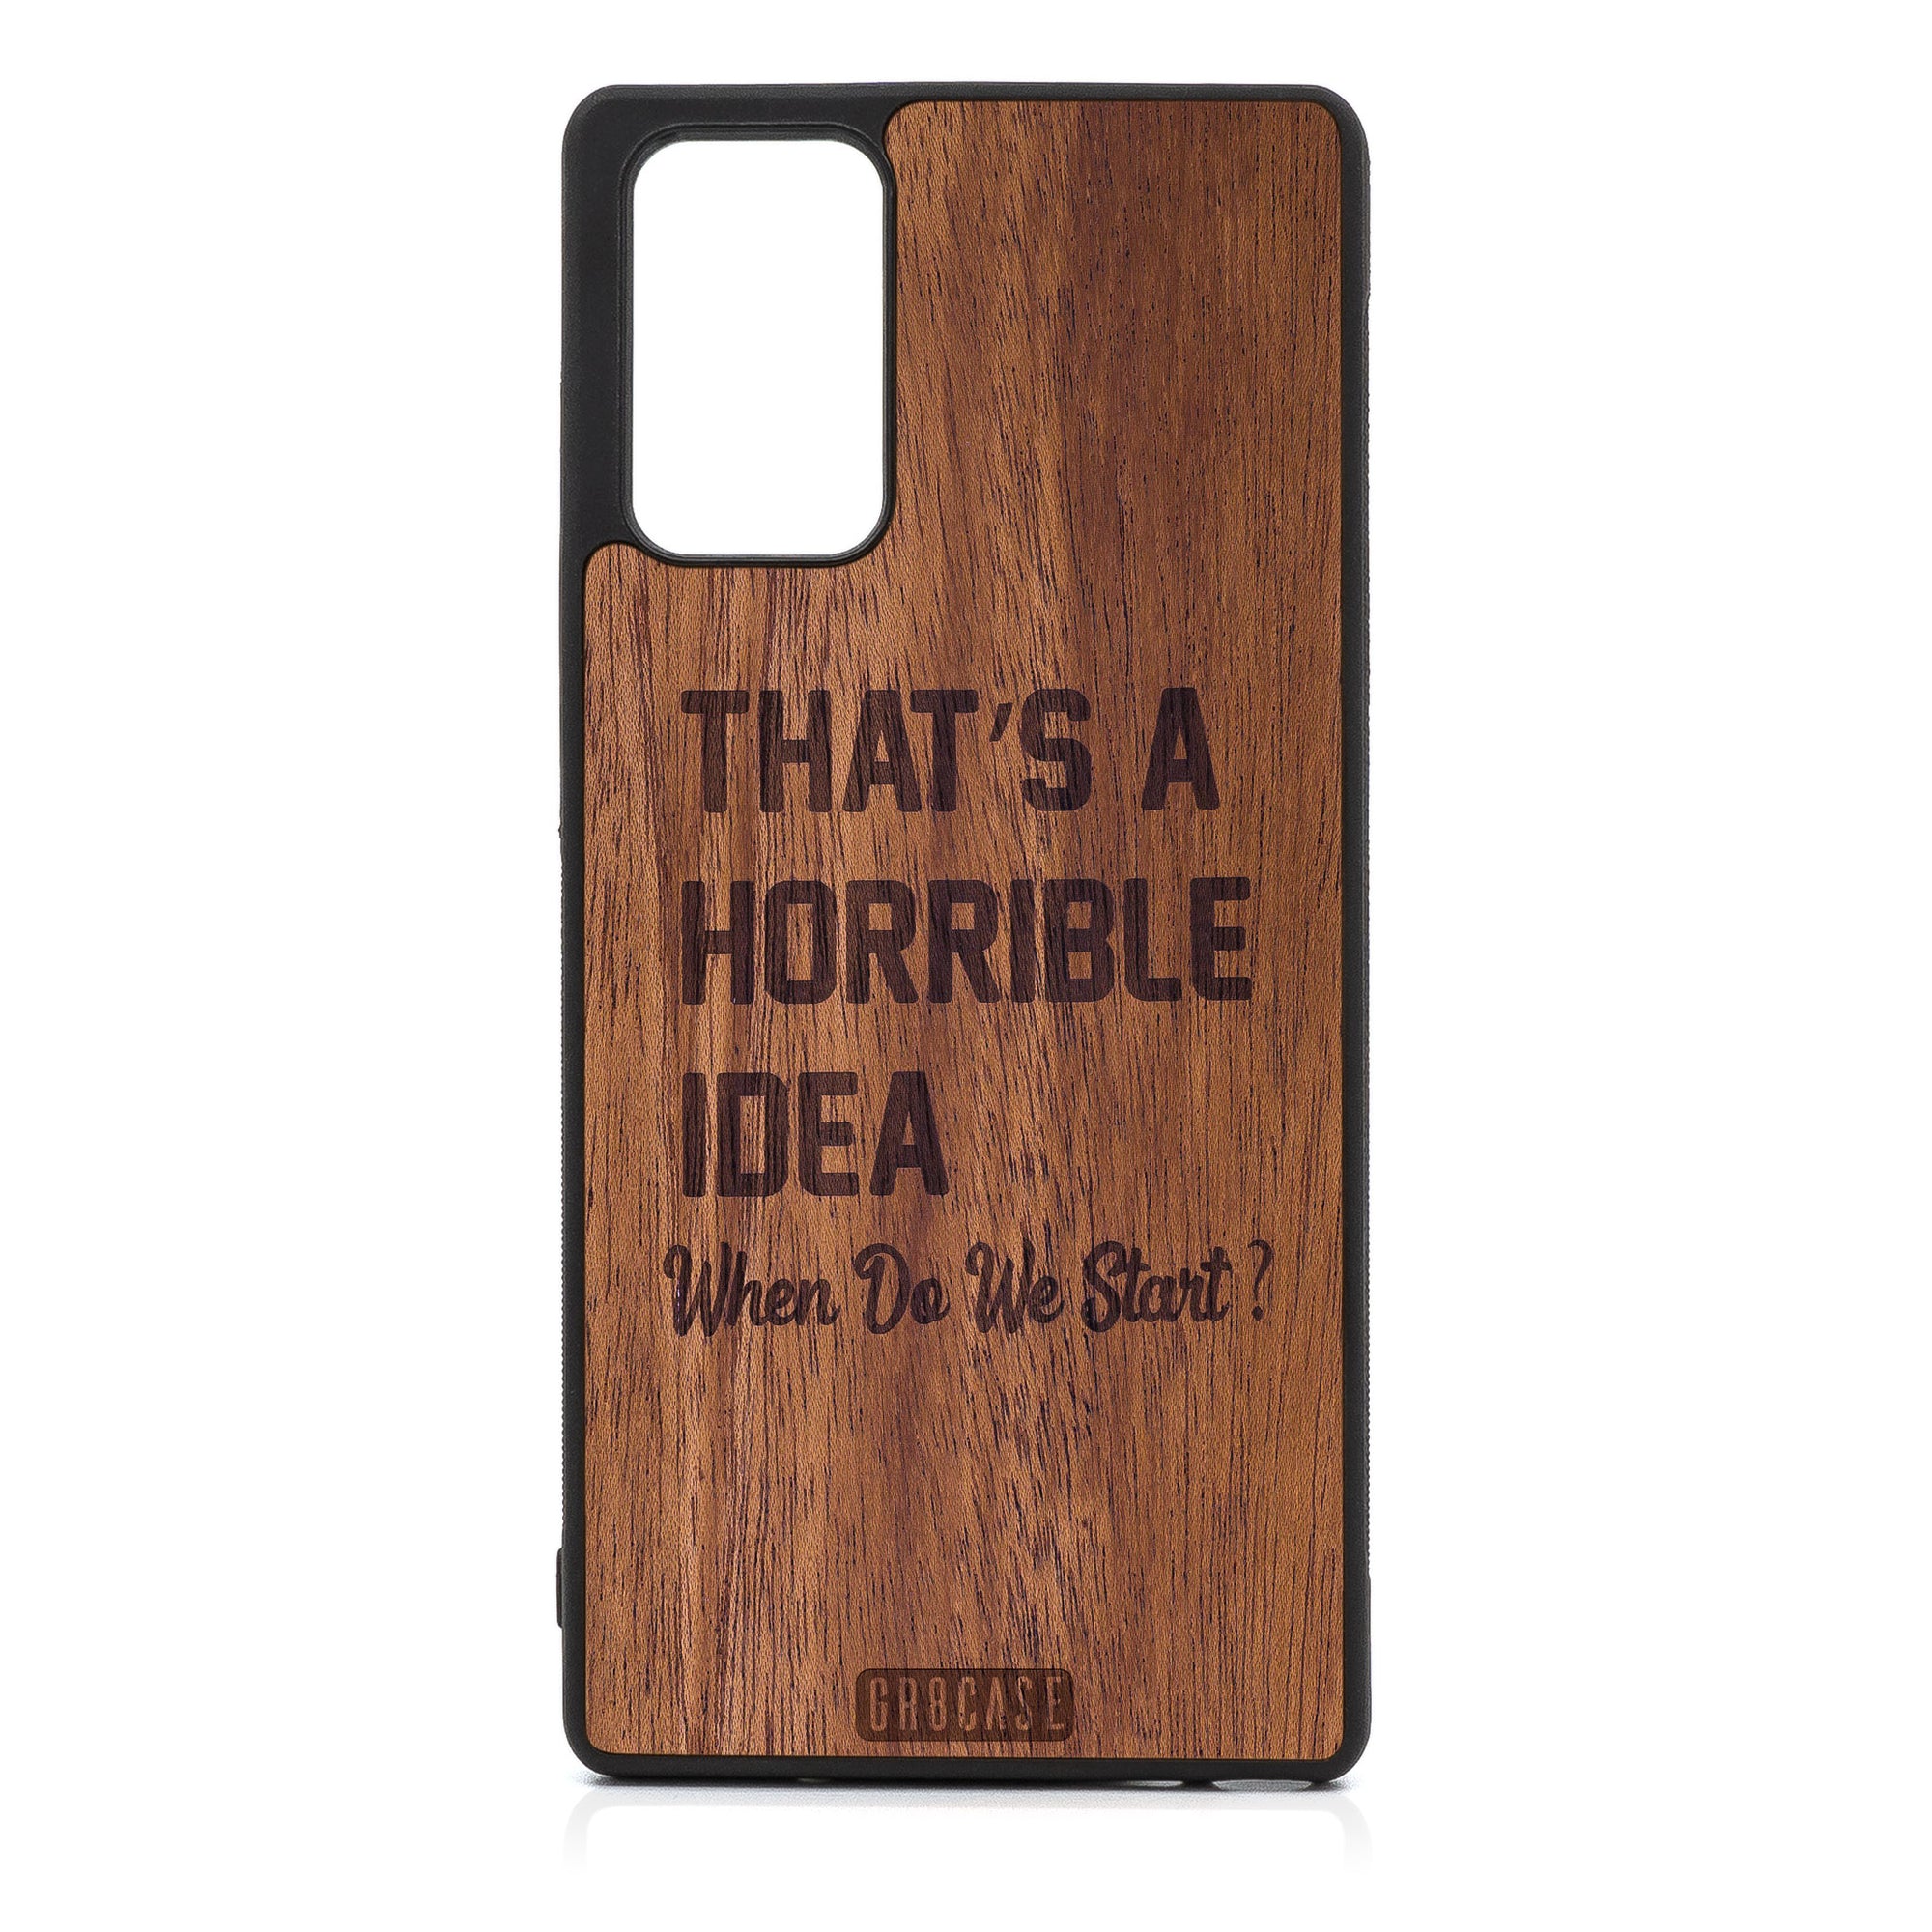 That’s A Horrible Idea When Do We Start Design Wood Case For Samsung Galaxy Note 20